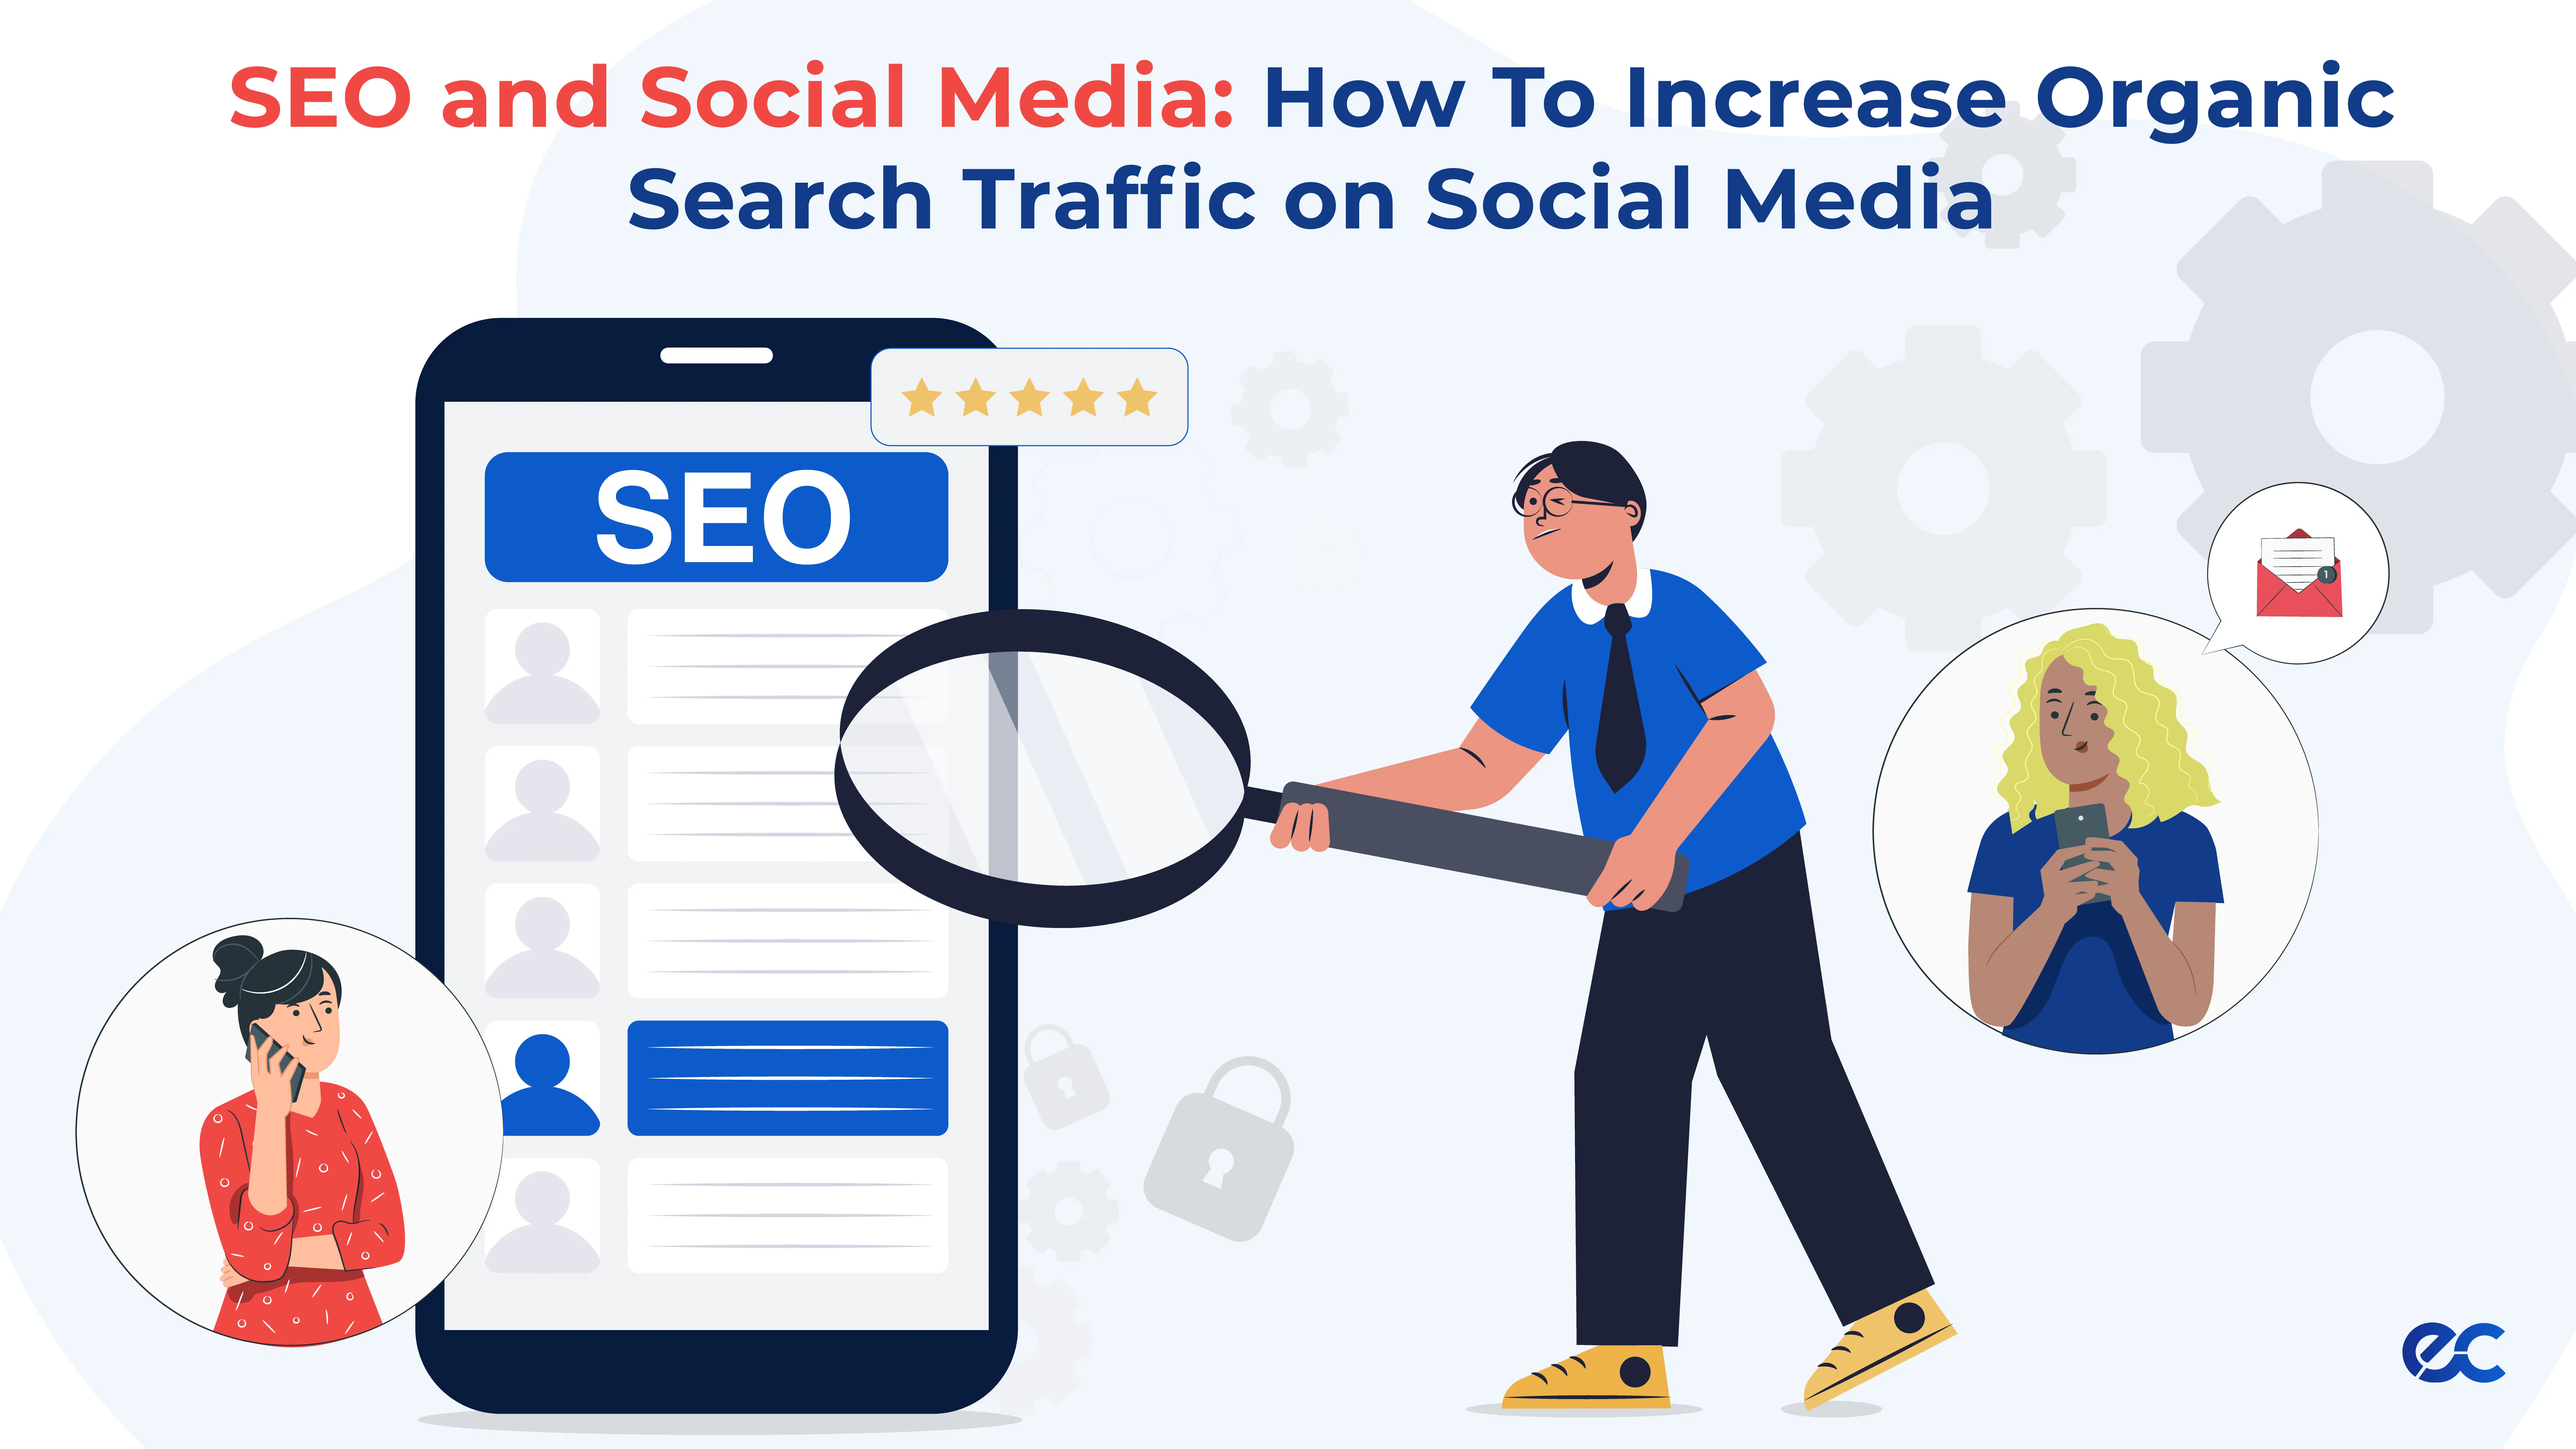 SEO and Social Media: How To Increase Organic Search Traffic on Social Media